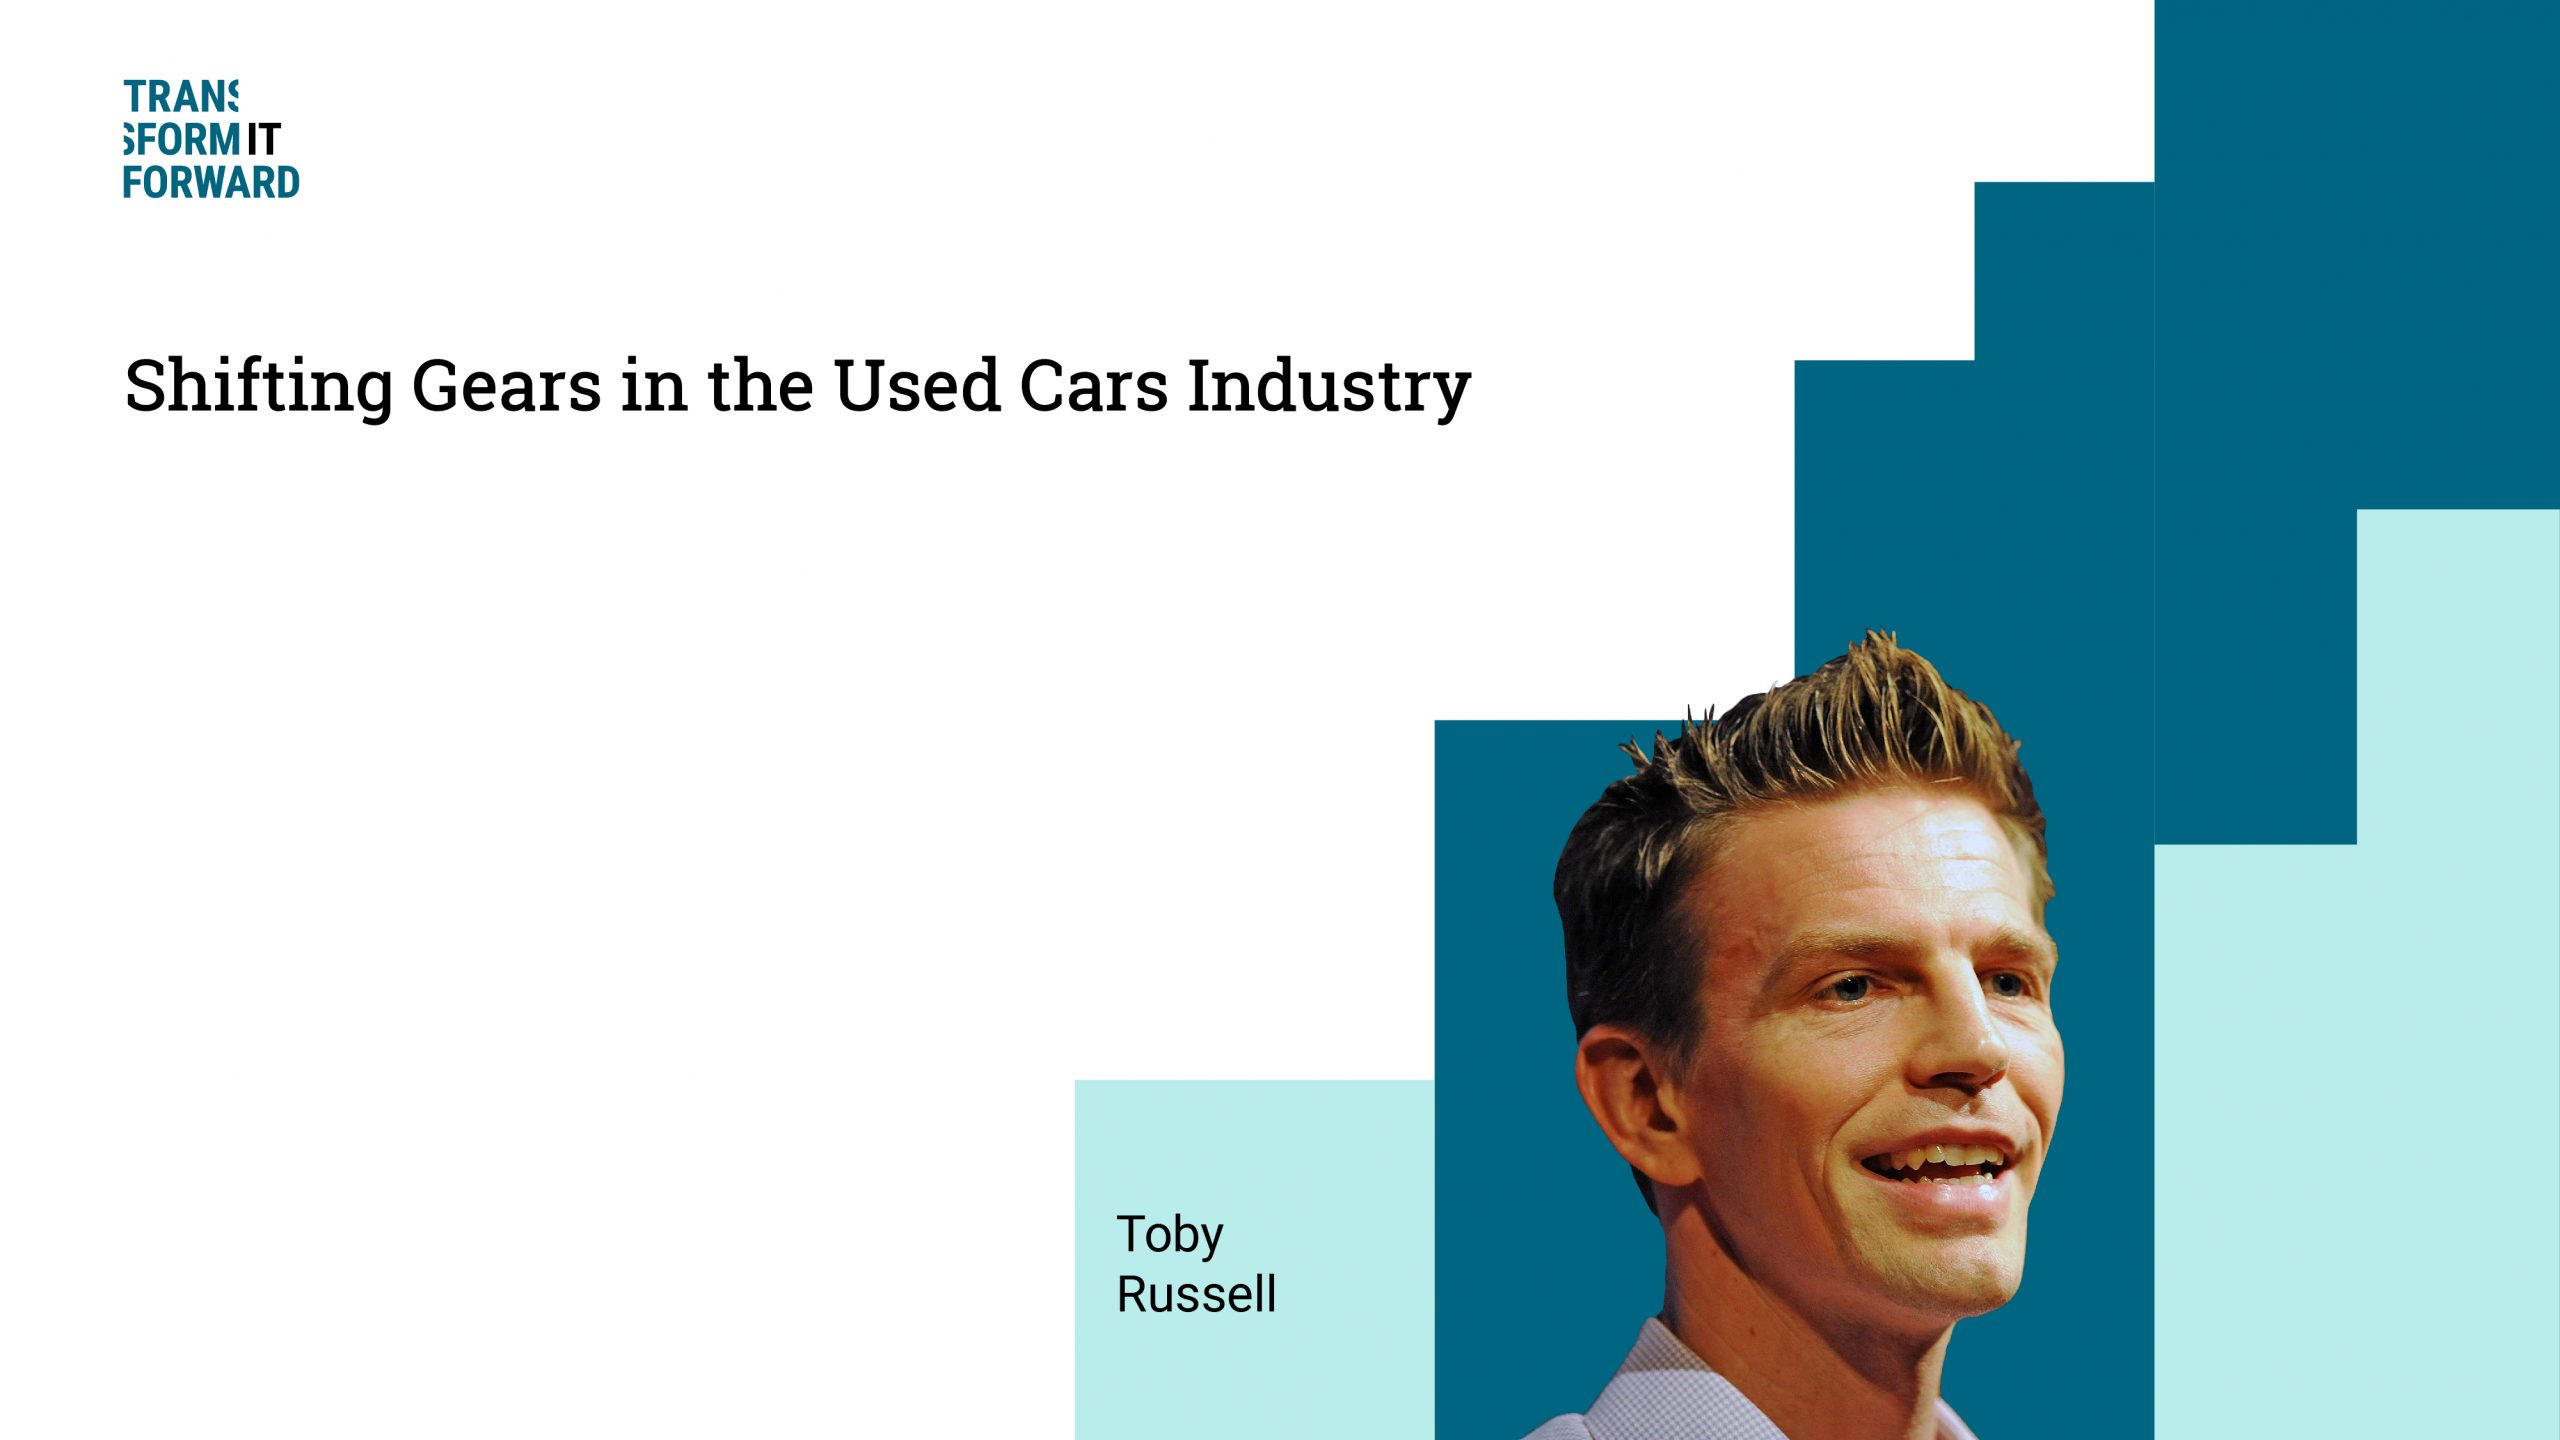 Shifting gears in the used cars industry